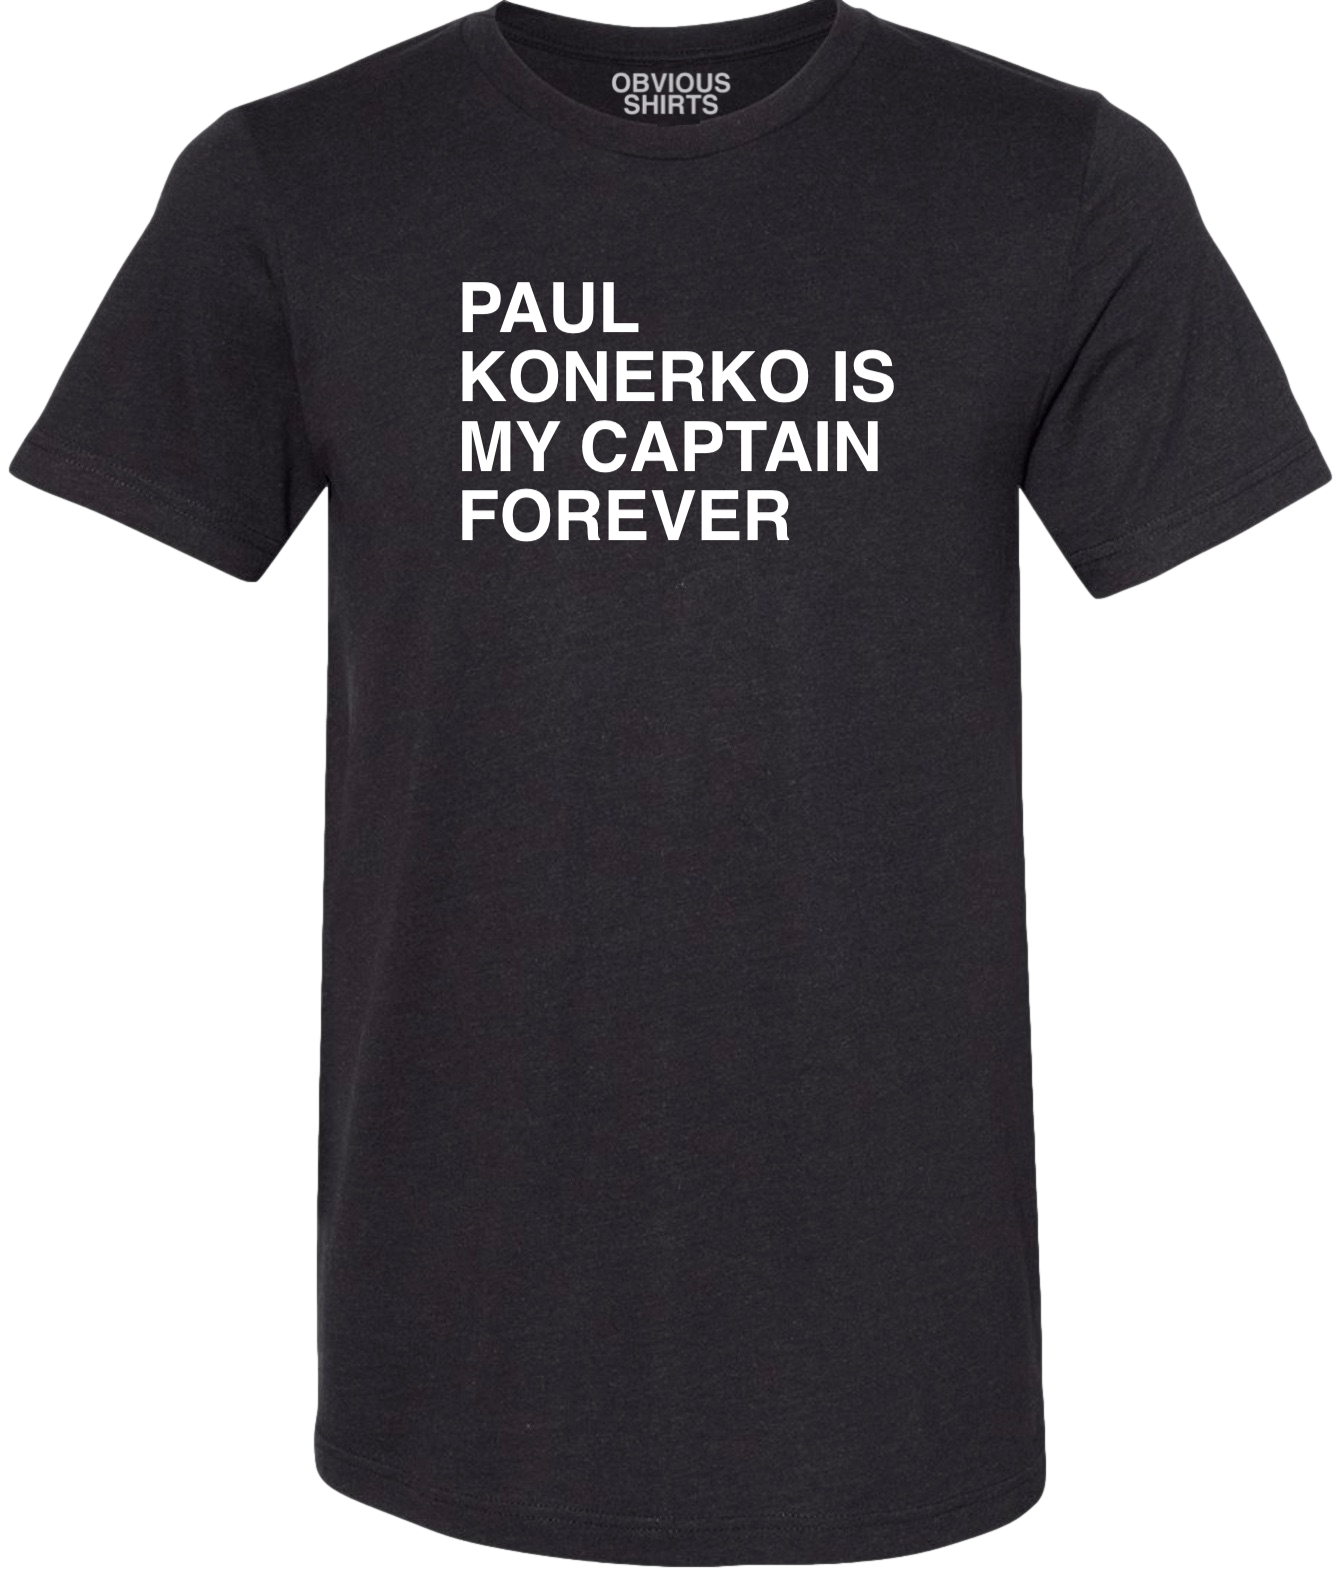 Paul Konerko Is My Captain Forever. | obvious Shirts. Black / MD